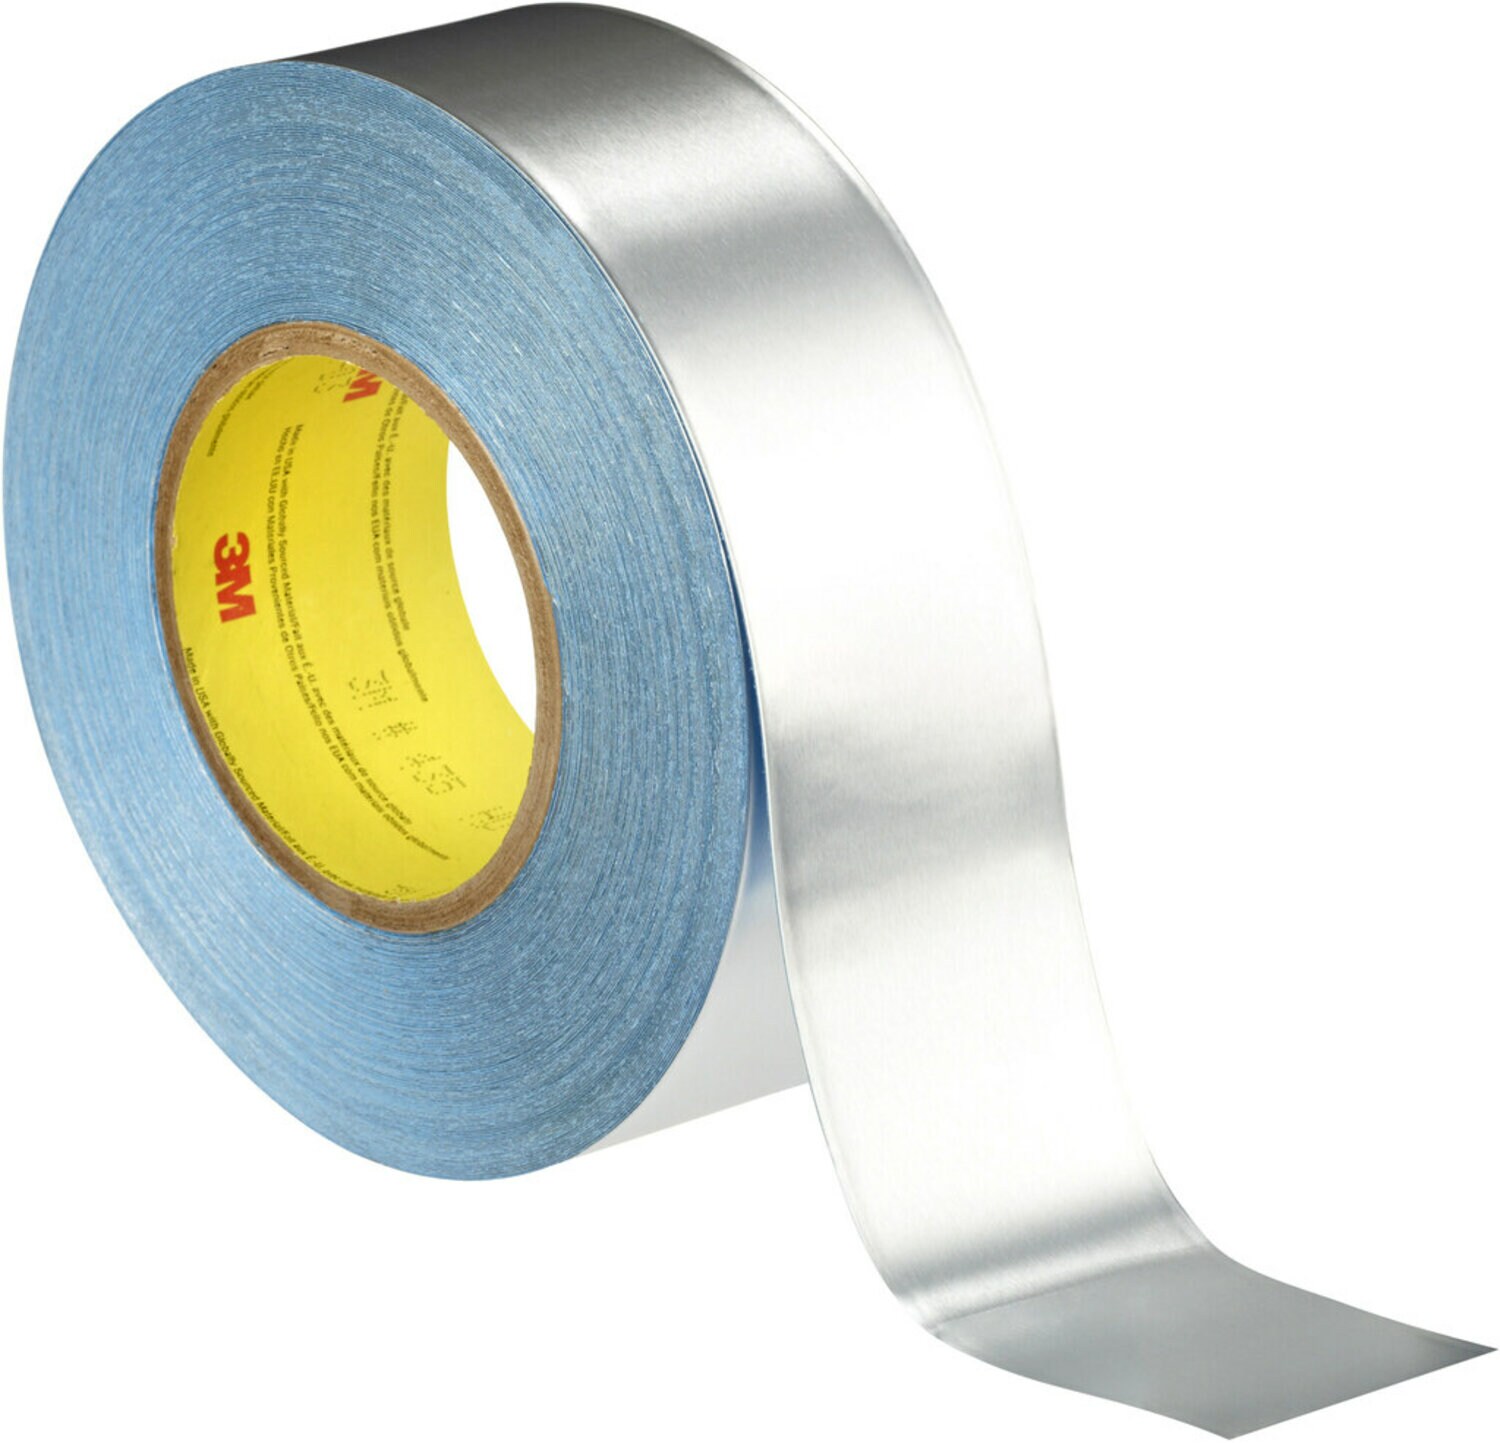 7000049127 - 3M Vibration Damping Tape 436, Silver, 1 in x 36 yd, 17.5 mil, 12 rolls
per case